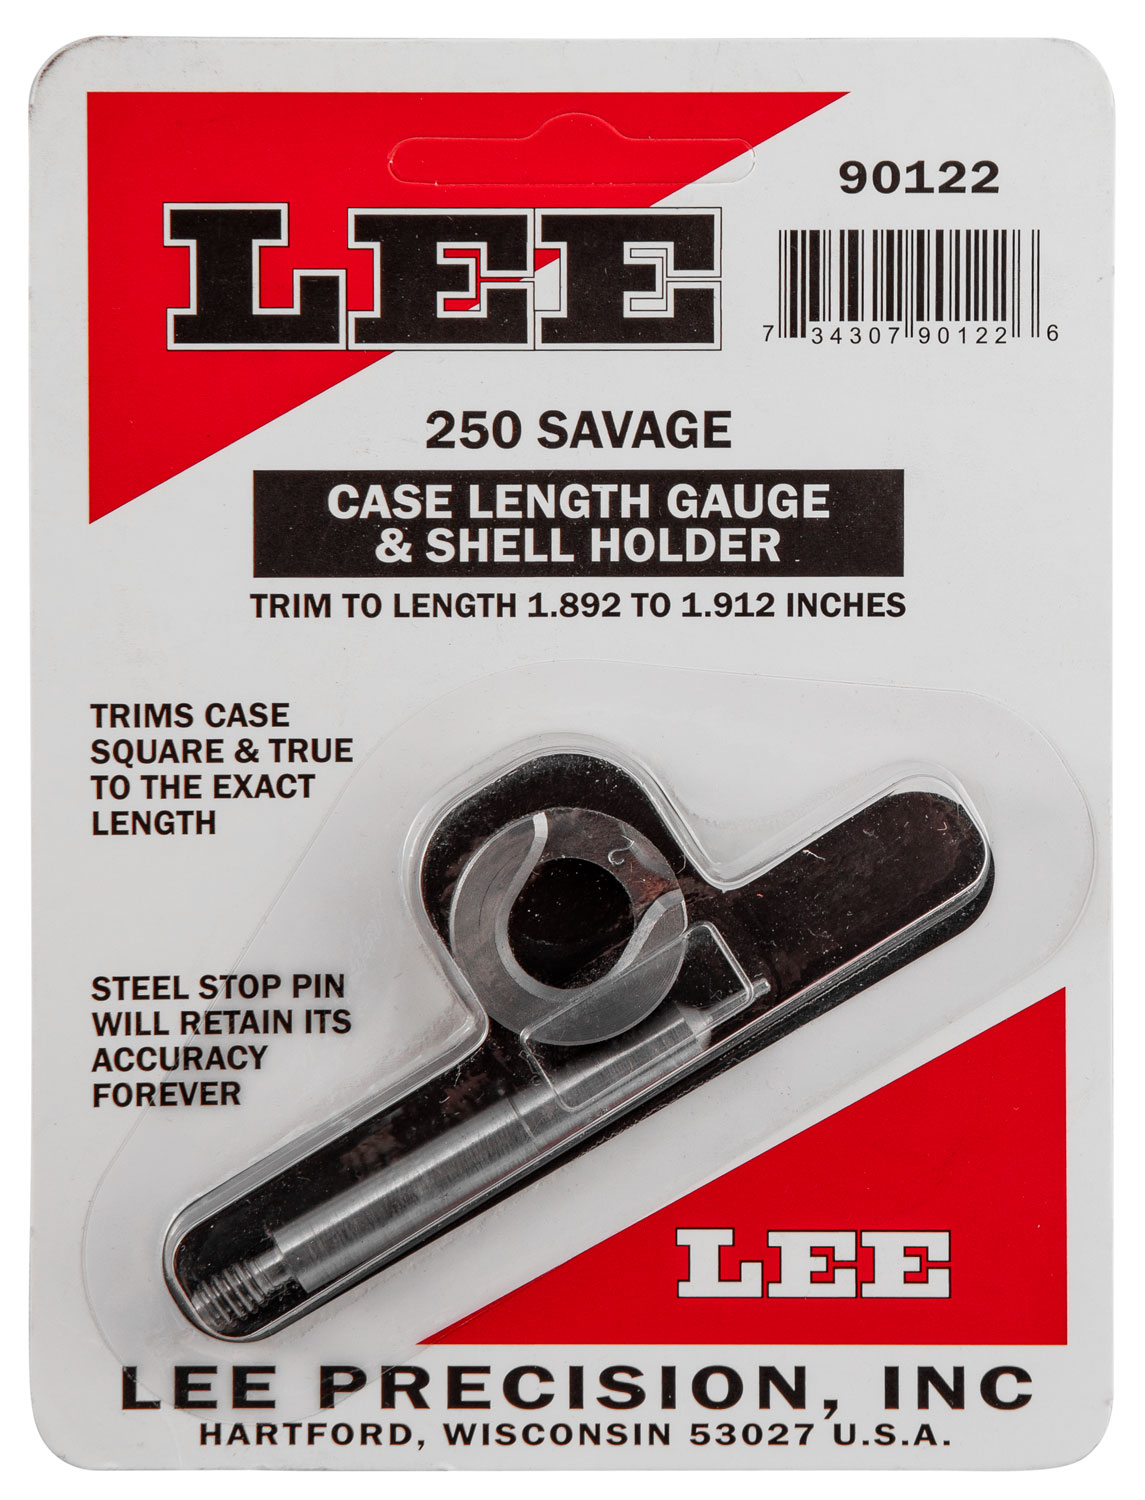 Lee Case Length Gage and Shellholder 250 Savage   # 90122   New! 